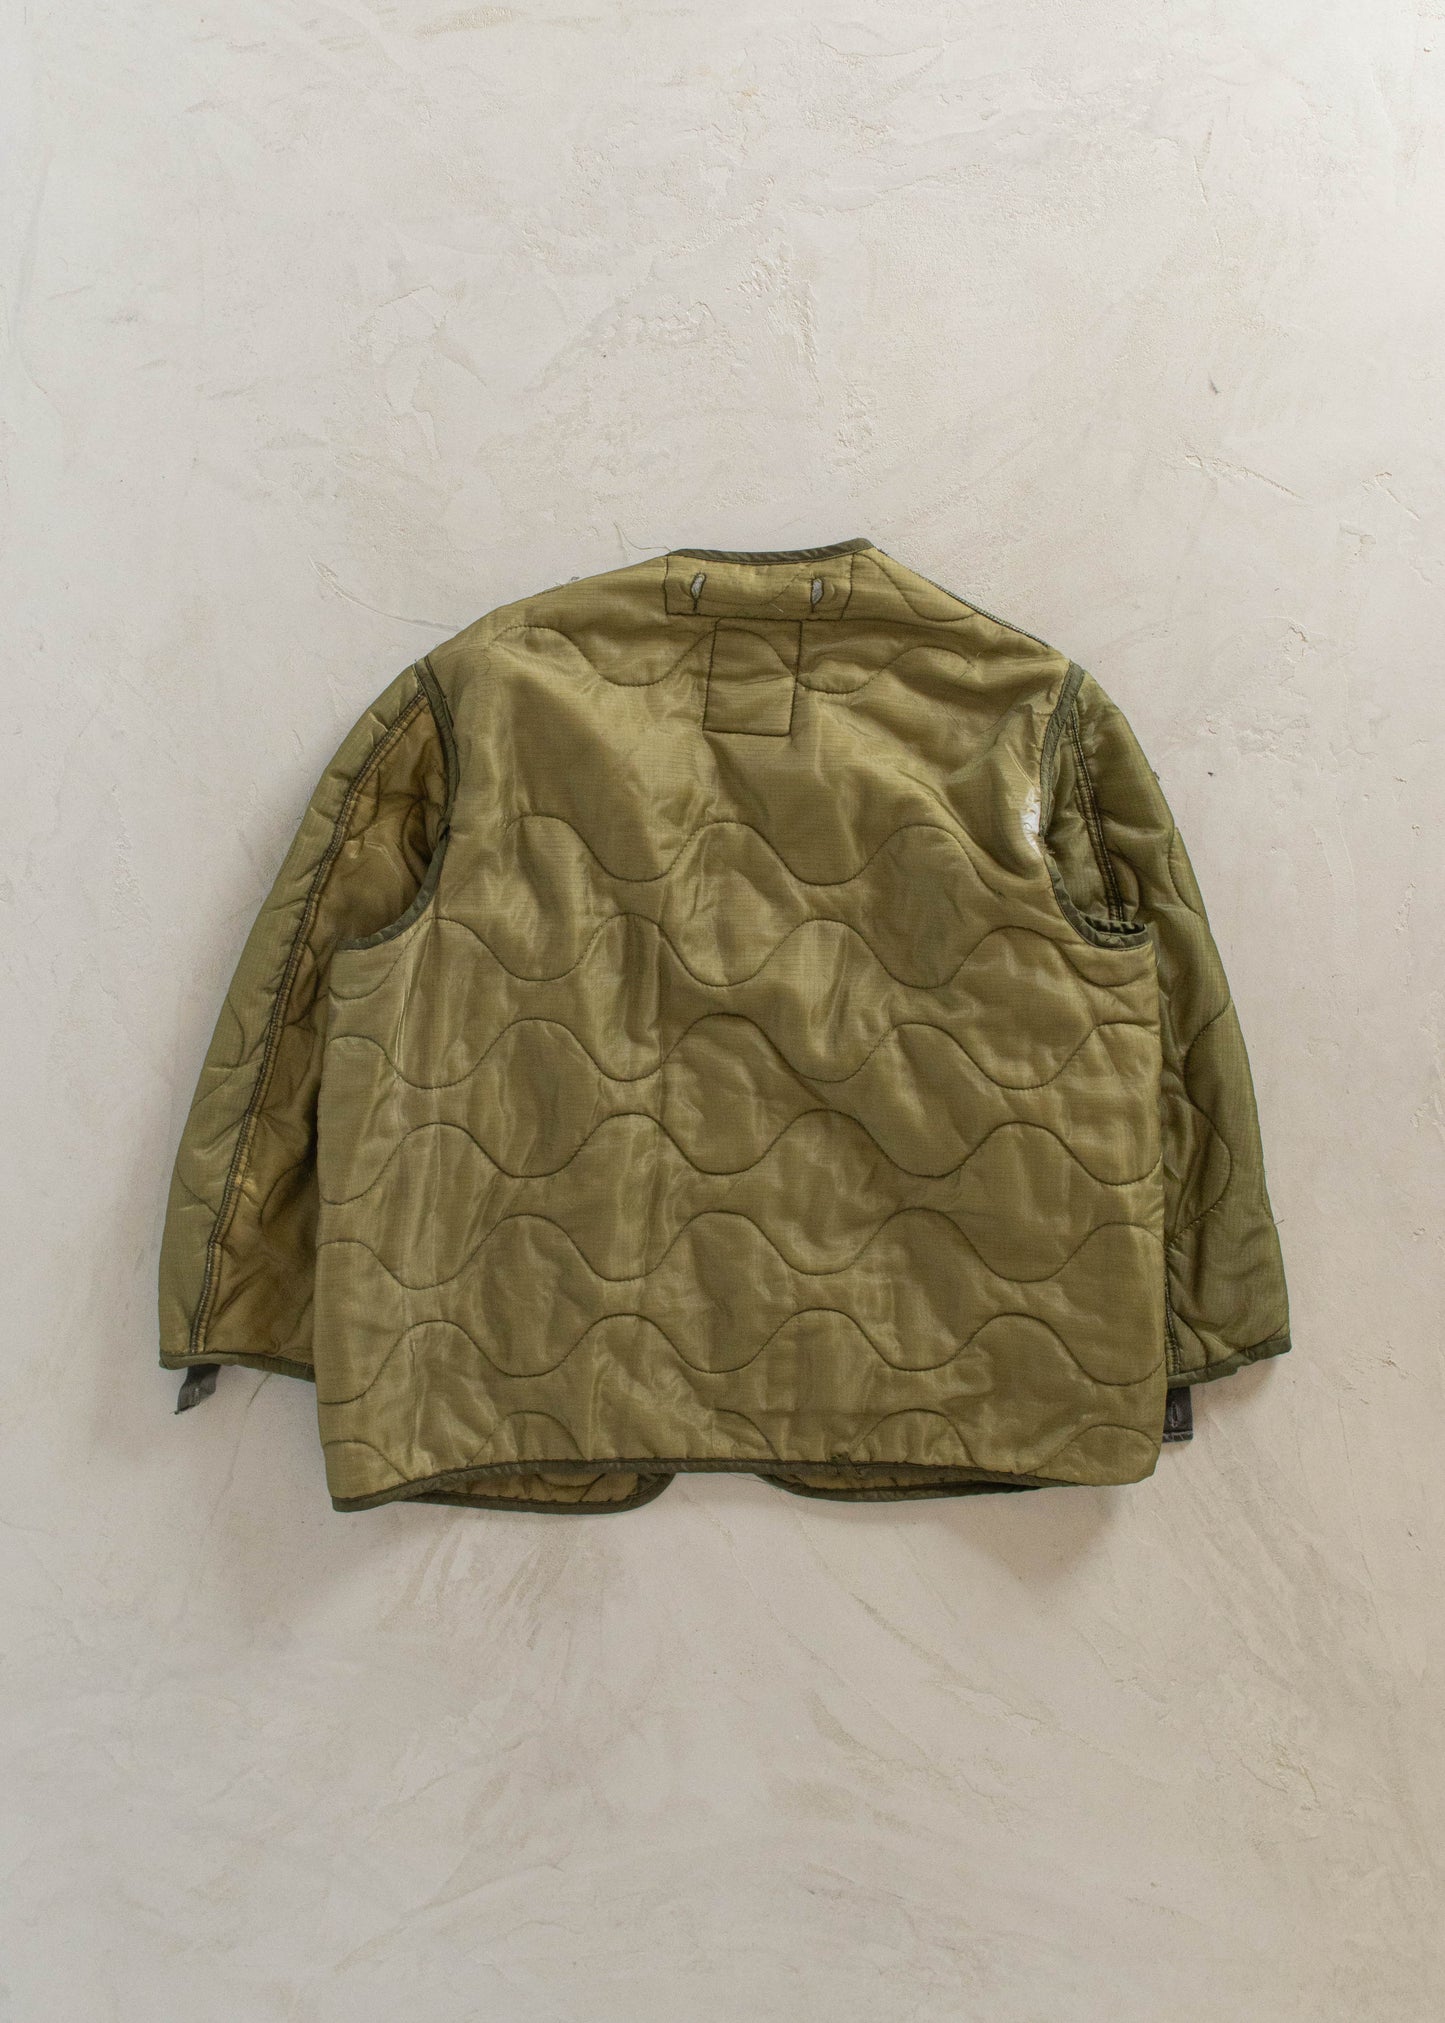 1980s Military M-65 Quilted Liner Jacket Size M/L